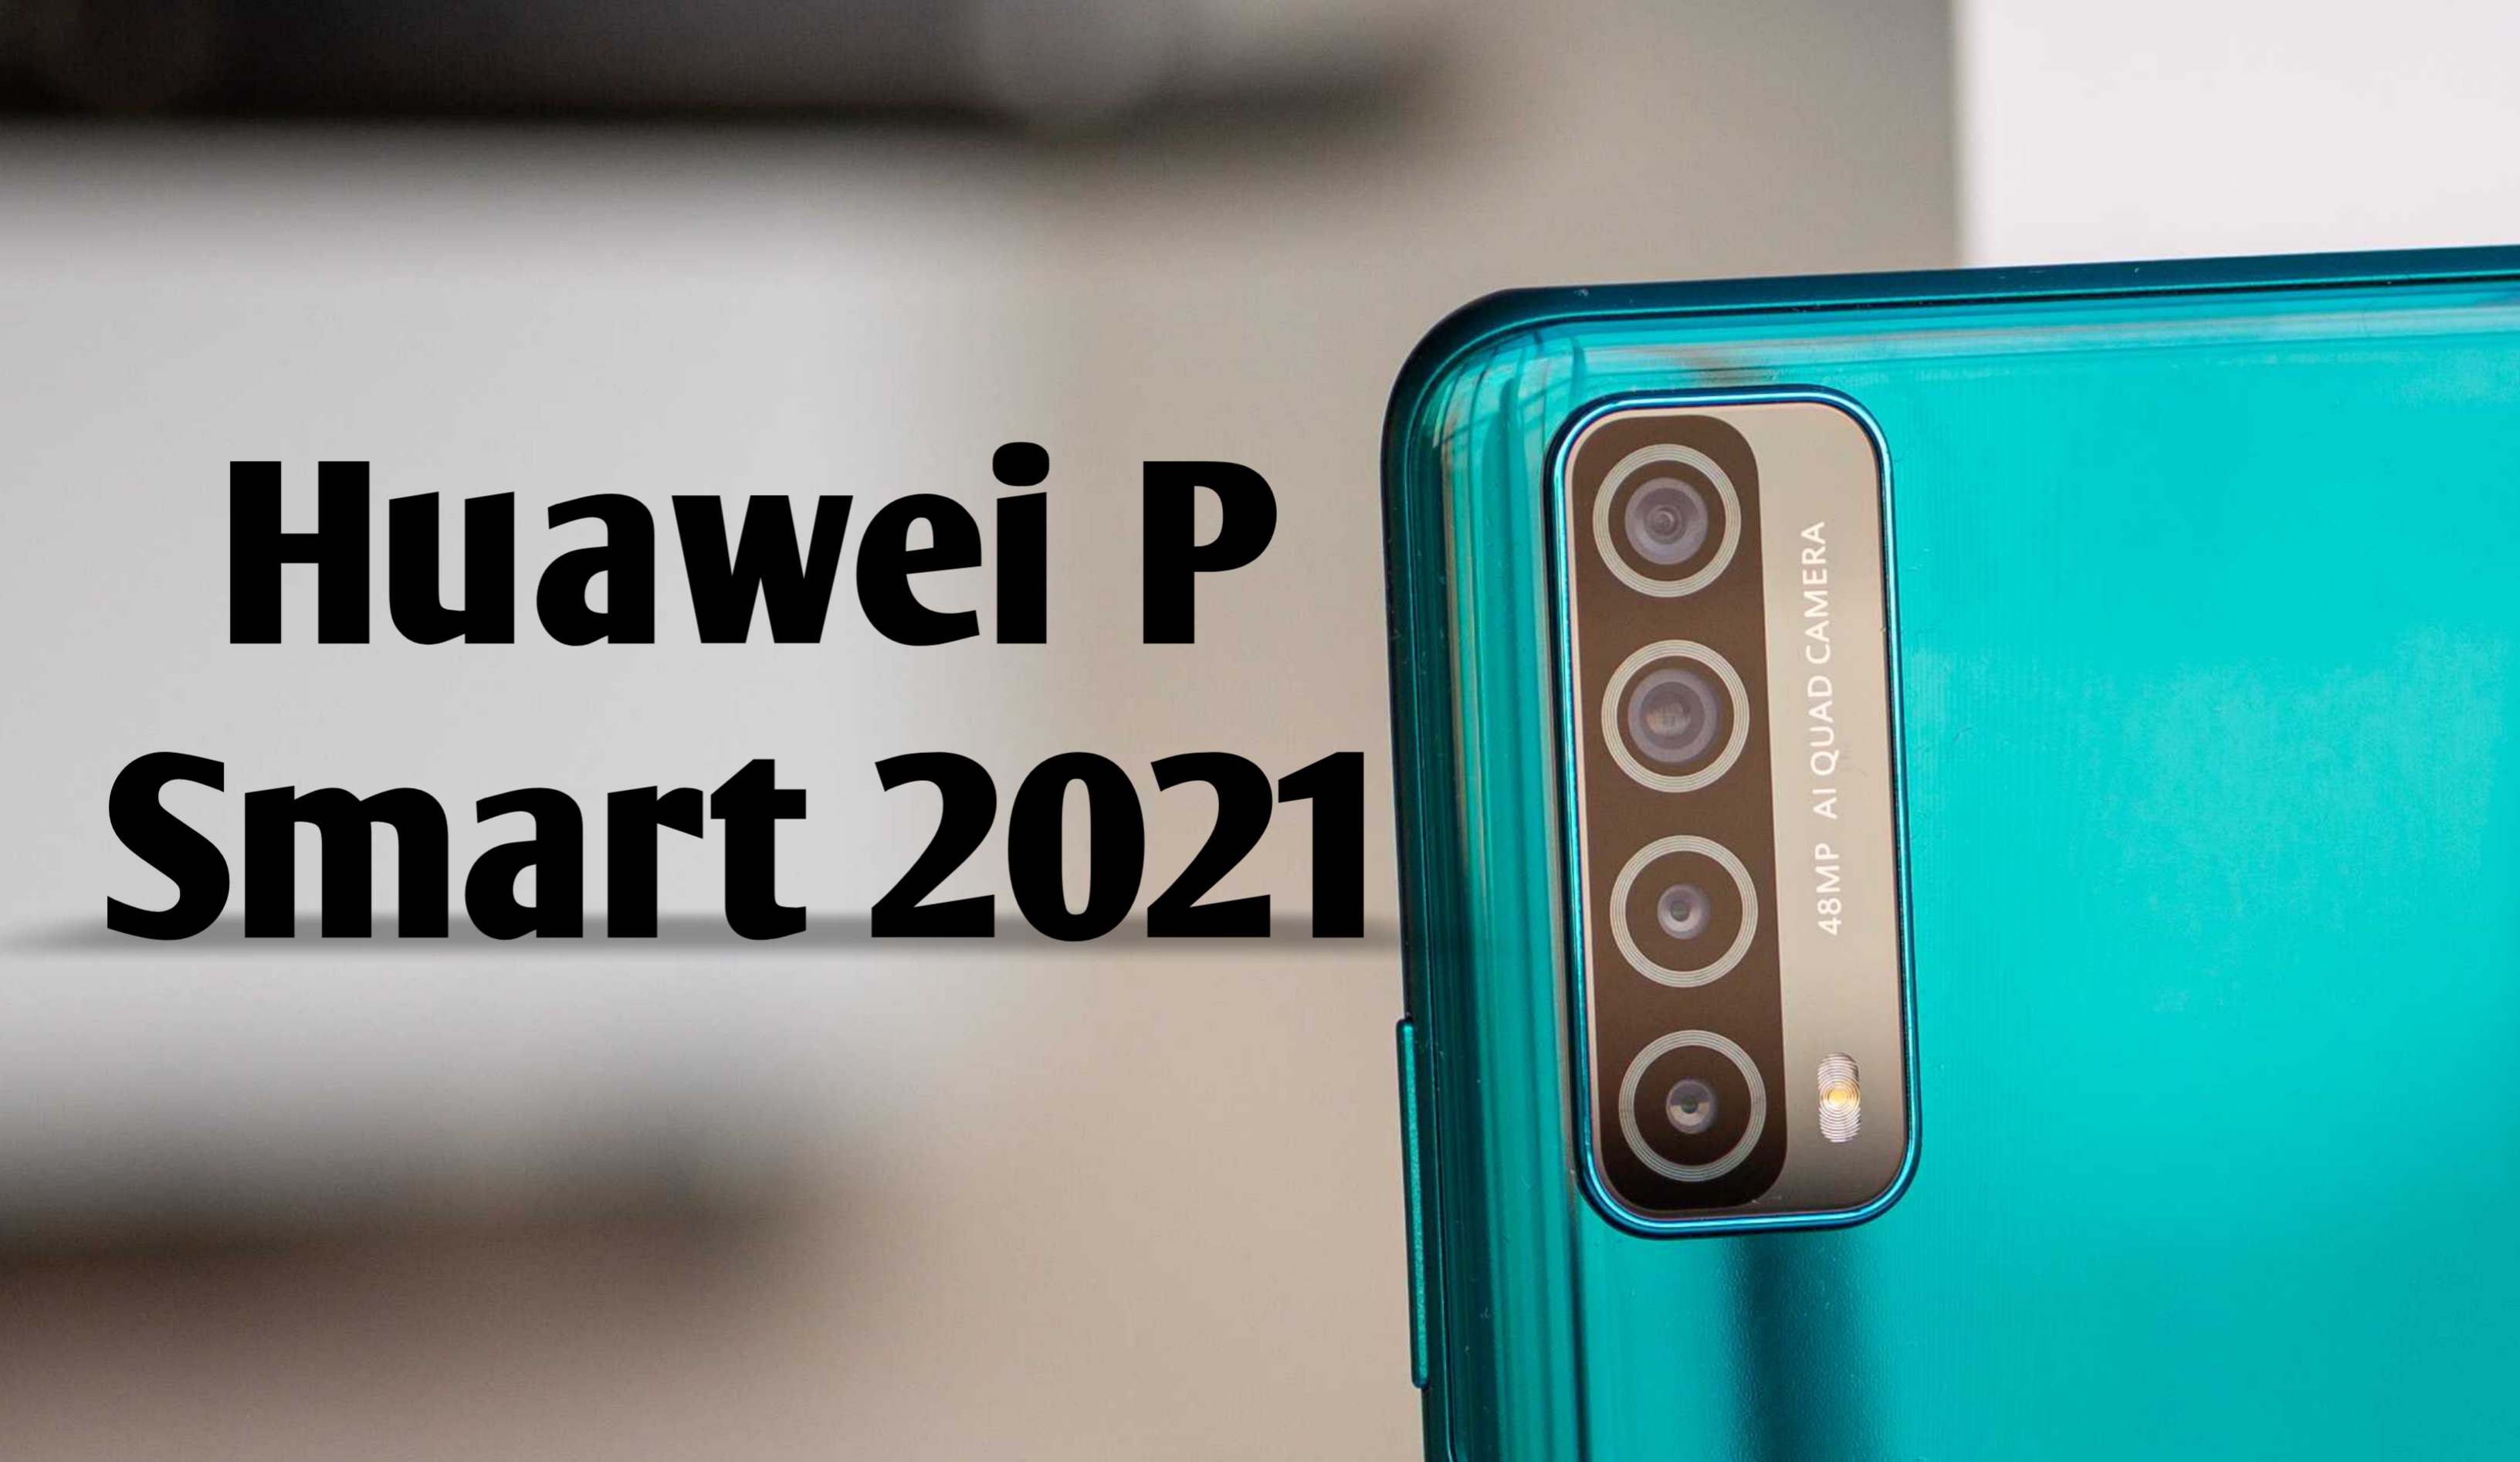 Huawei P Smart 2021 Review and Specification